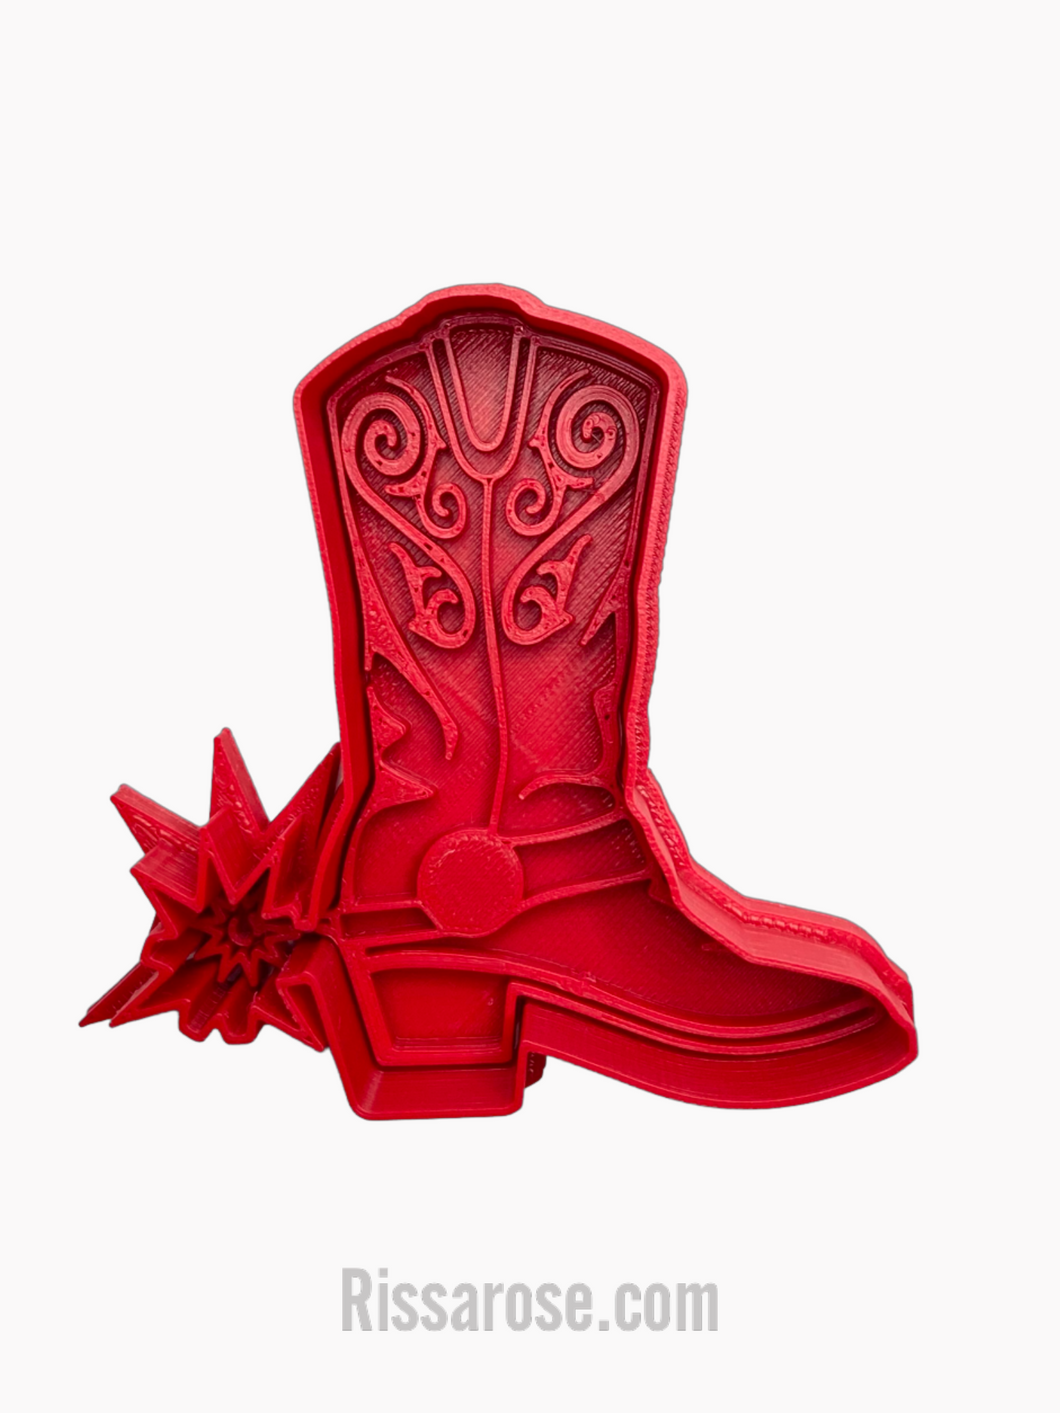 cowboy theme cookie cutter boot hat star leather boot